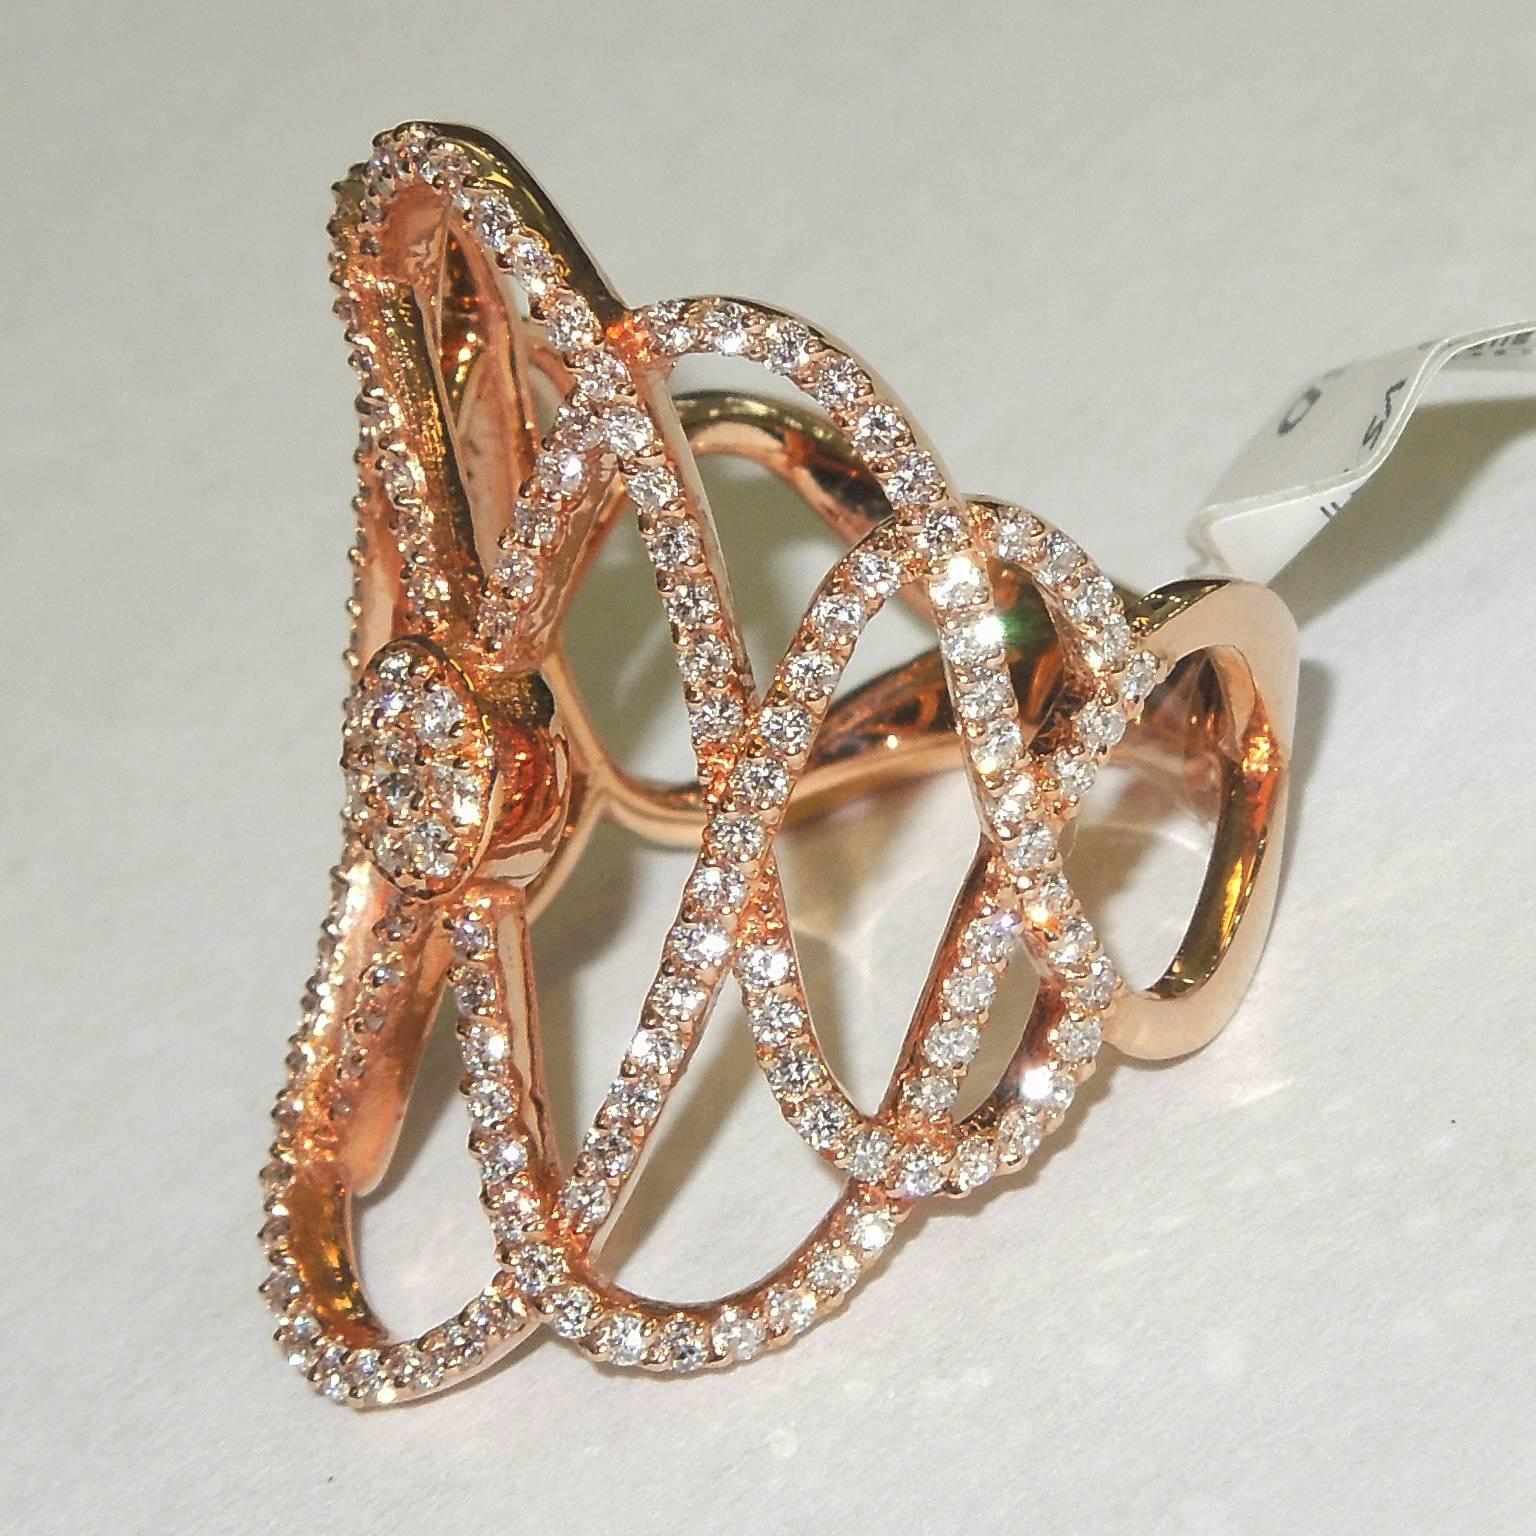 18K Rose Gold Ring with Diamonds

1.29ct. apprx. G Color, VS Clarity Diamonds

8.59grams 18K Gold

Width of face: 1.1 inch
Band width: 0.4 inch

Available in sizes 5-12.

